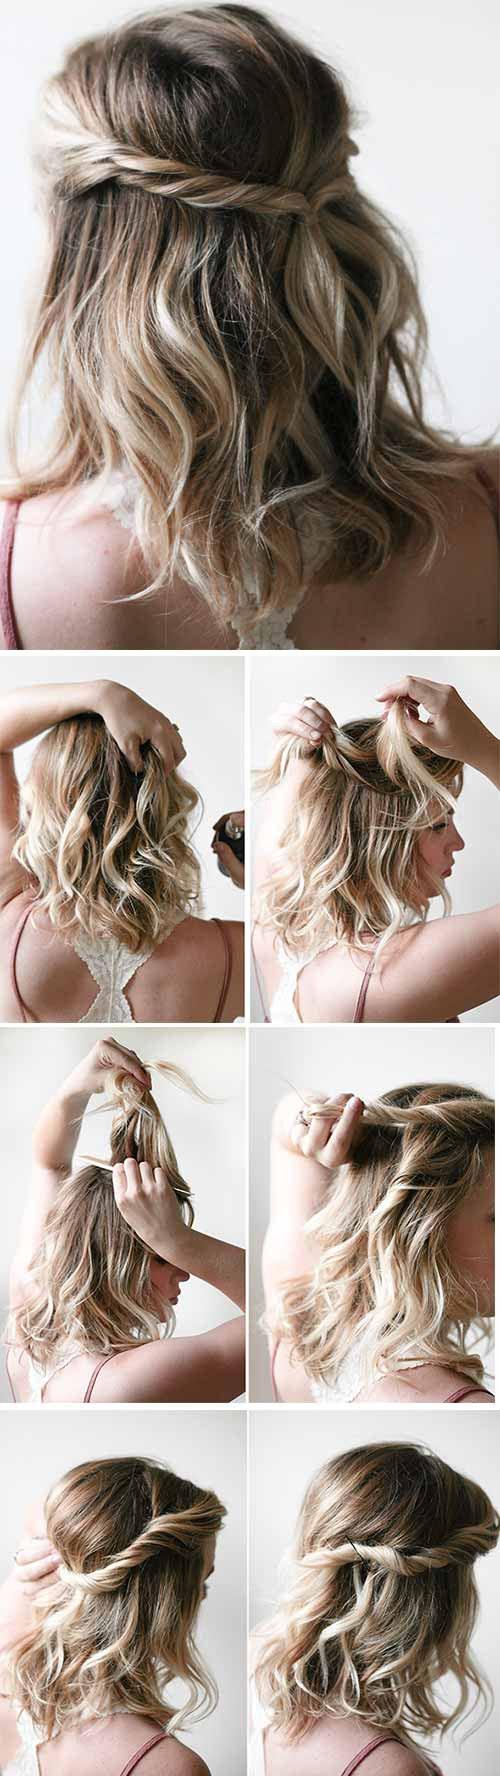 Easy Fast Hairstyles For Short Hair
 20 Incredible DIY Short Hairstyles A Step By Step Guide